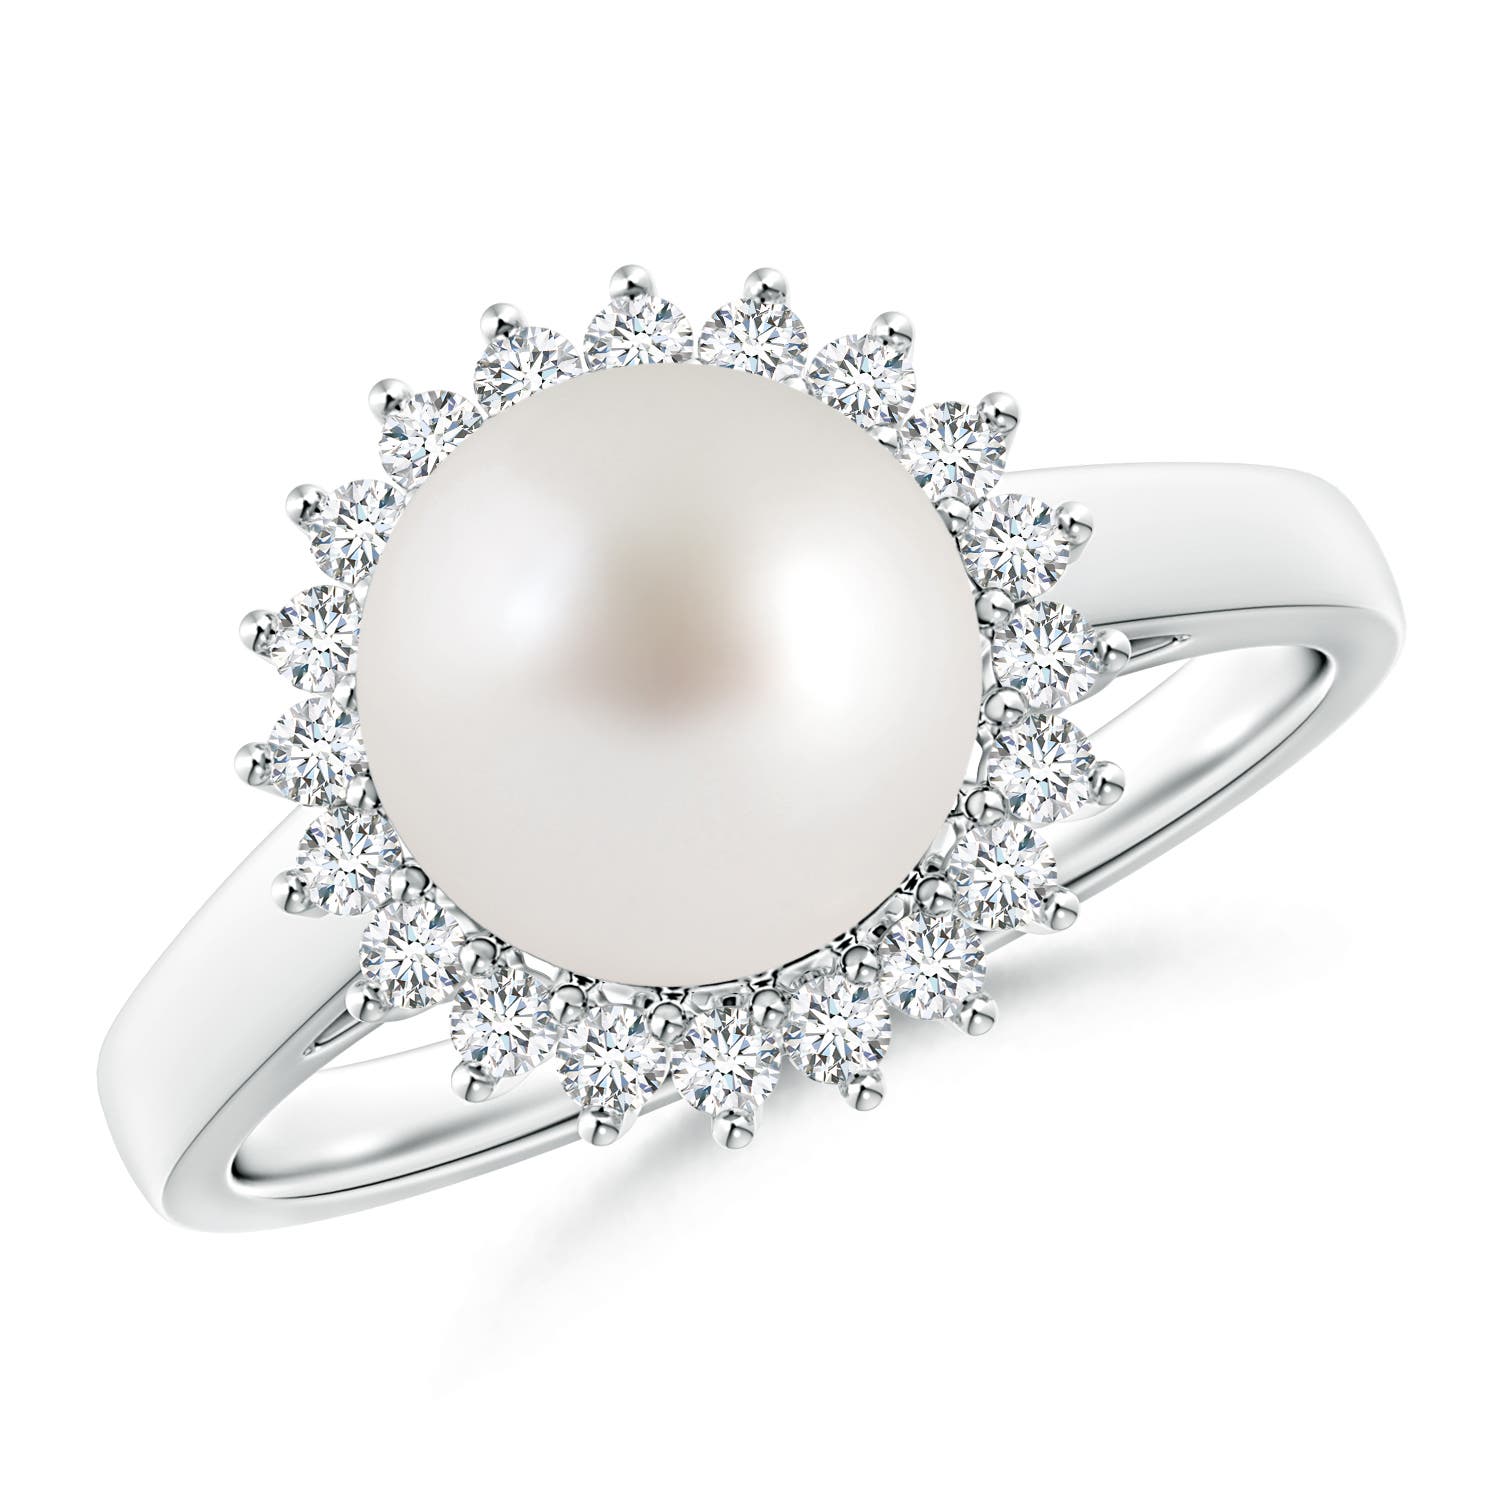 South Sea Pearl Ring with Floral Halo | Angara